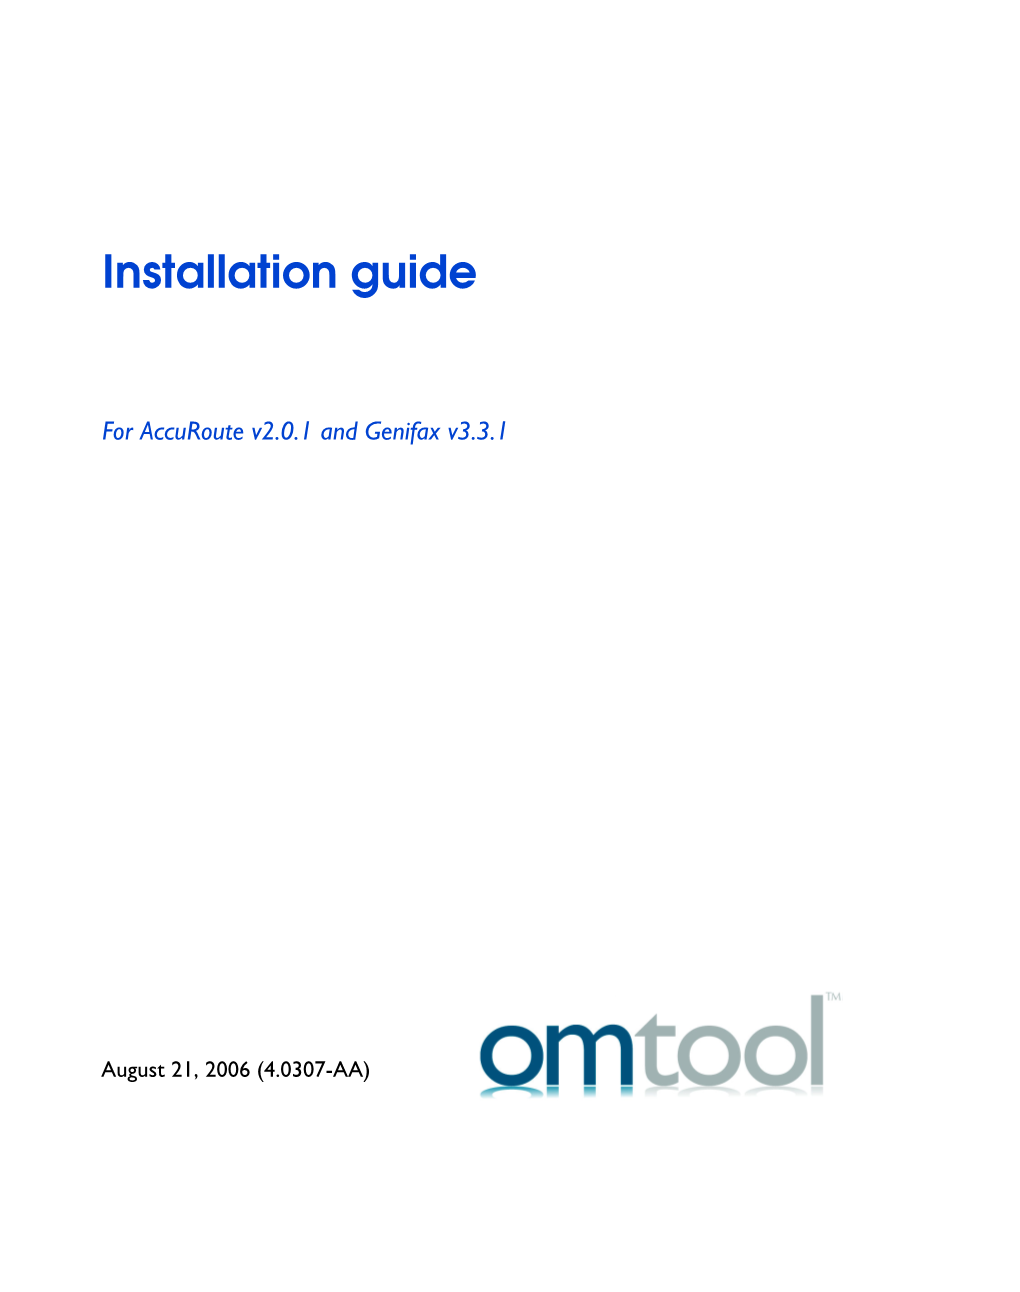 Installation Guide for Accuroute V2.0.1 and Genifax V3.3.1 V